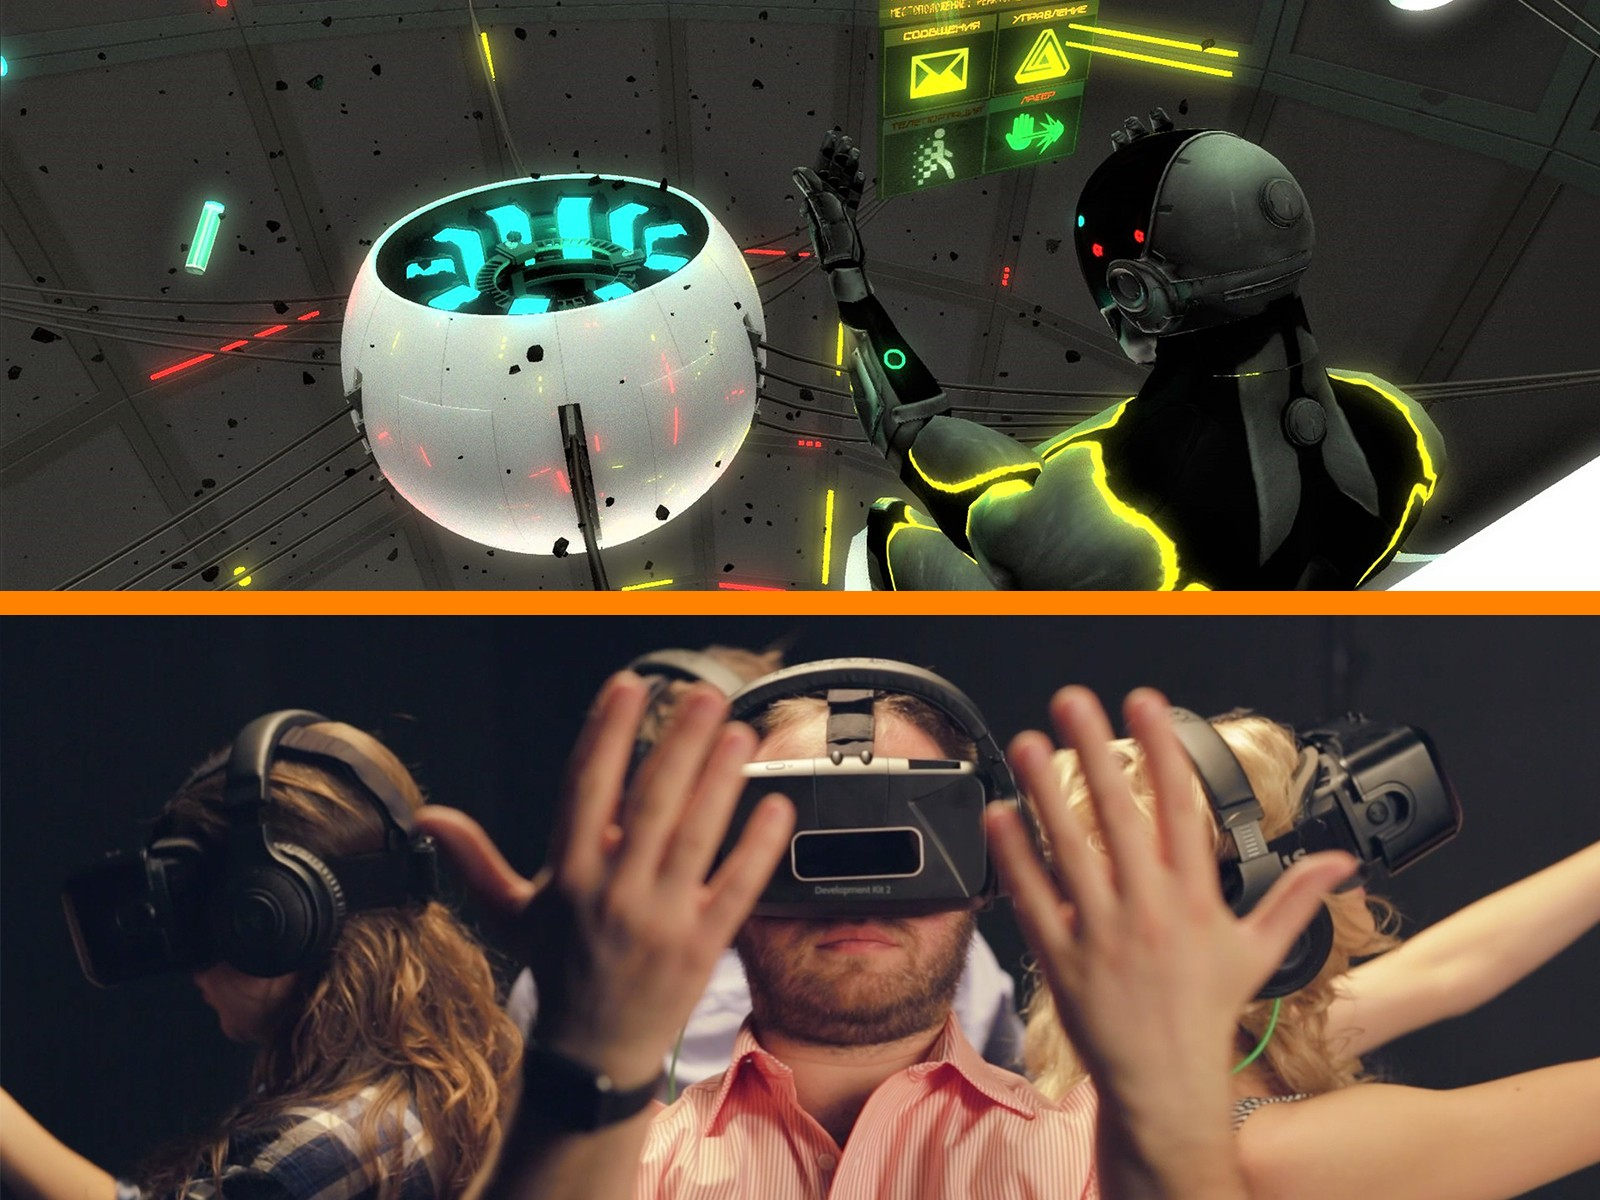 The variety of VR escape games